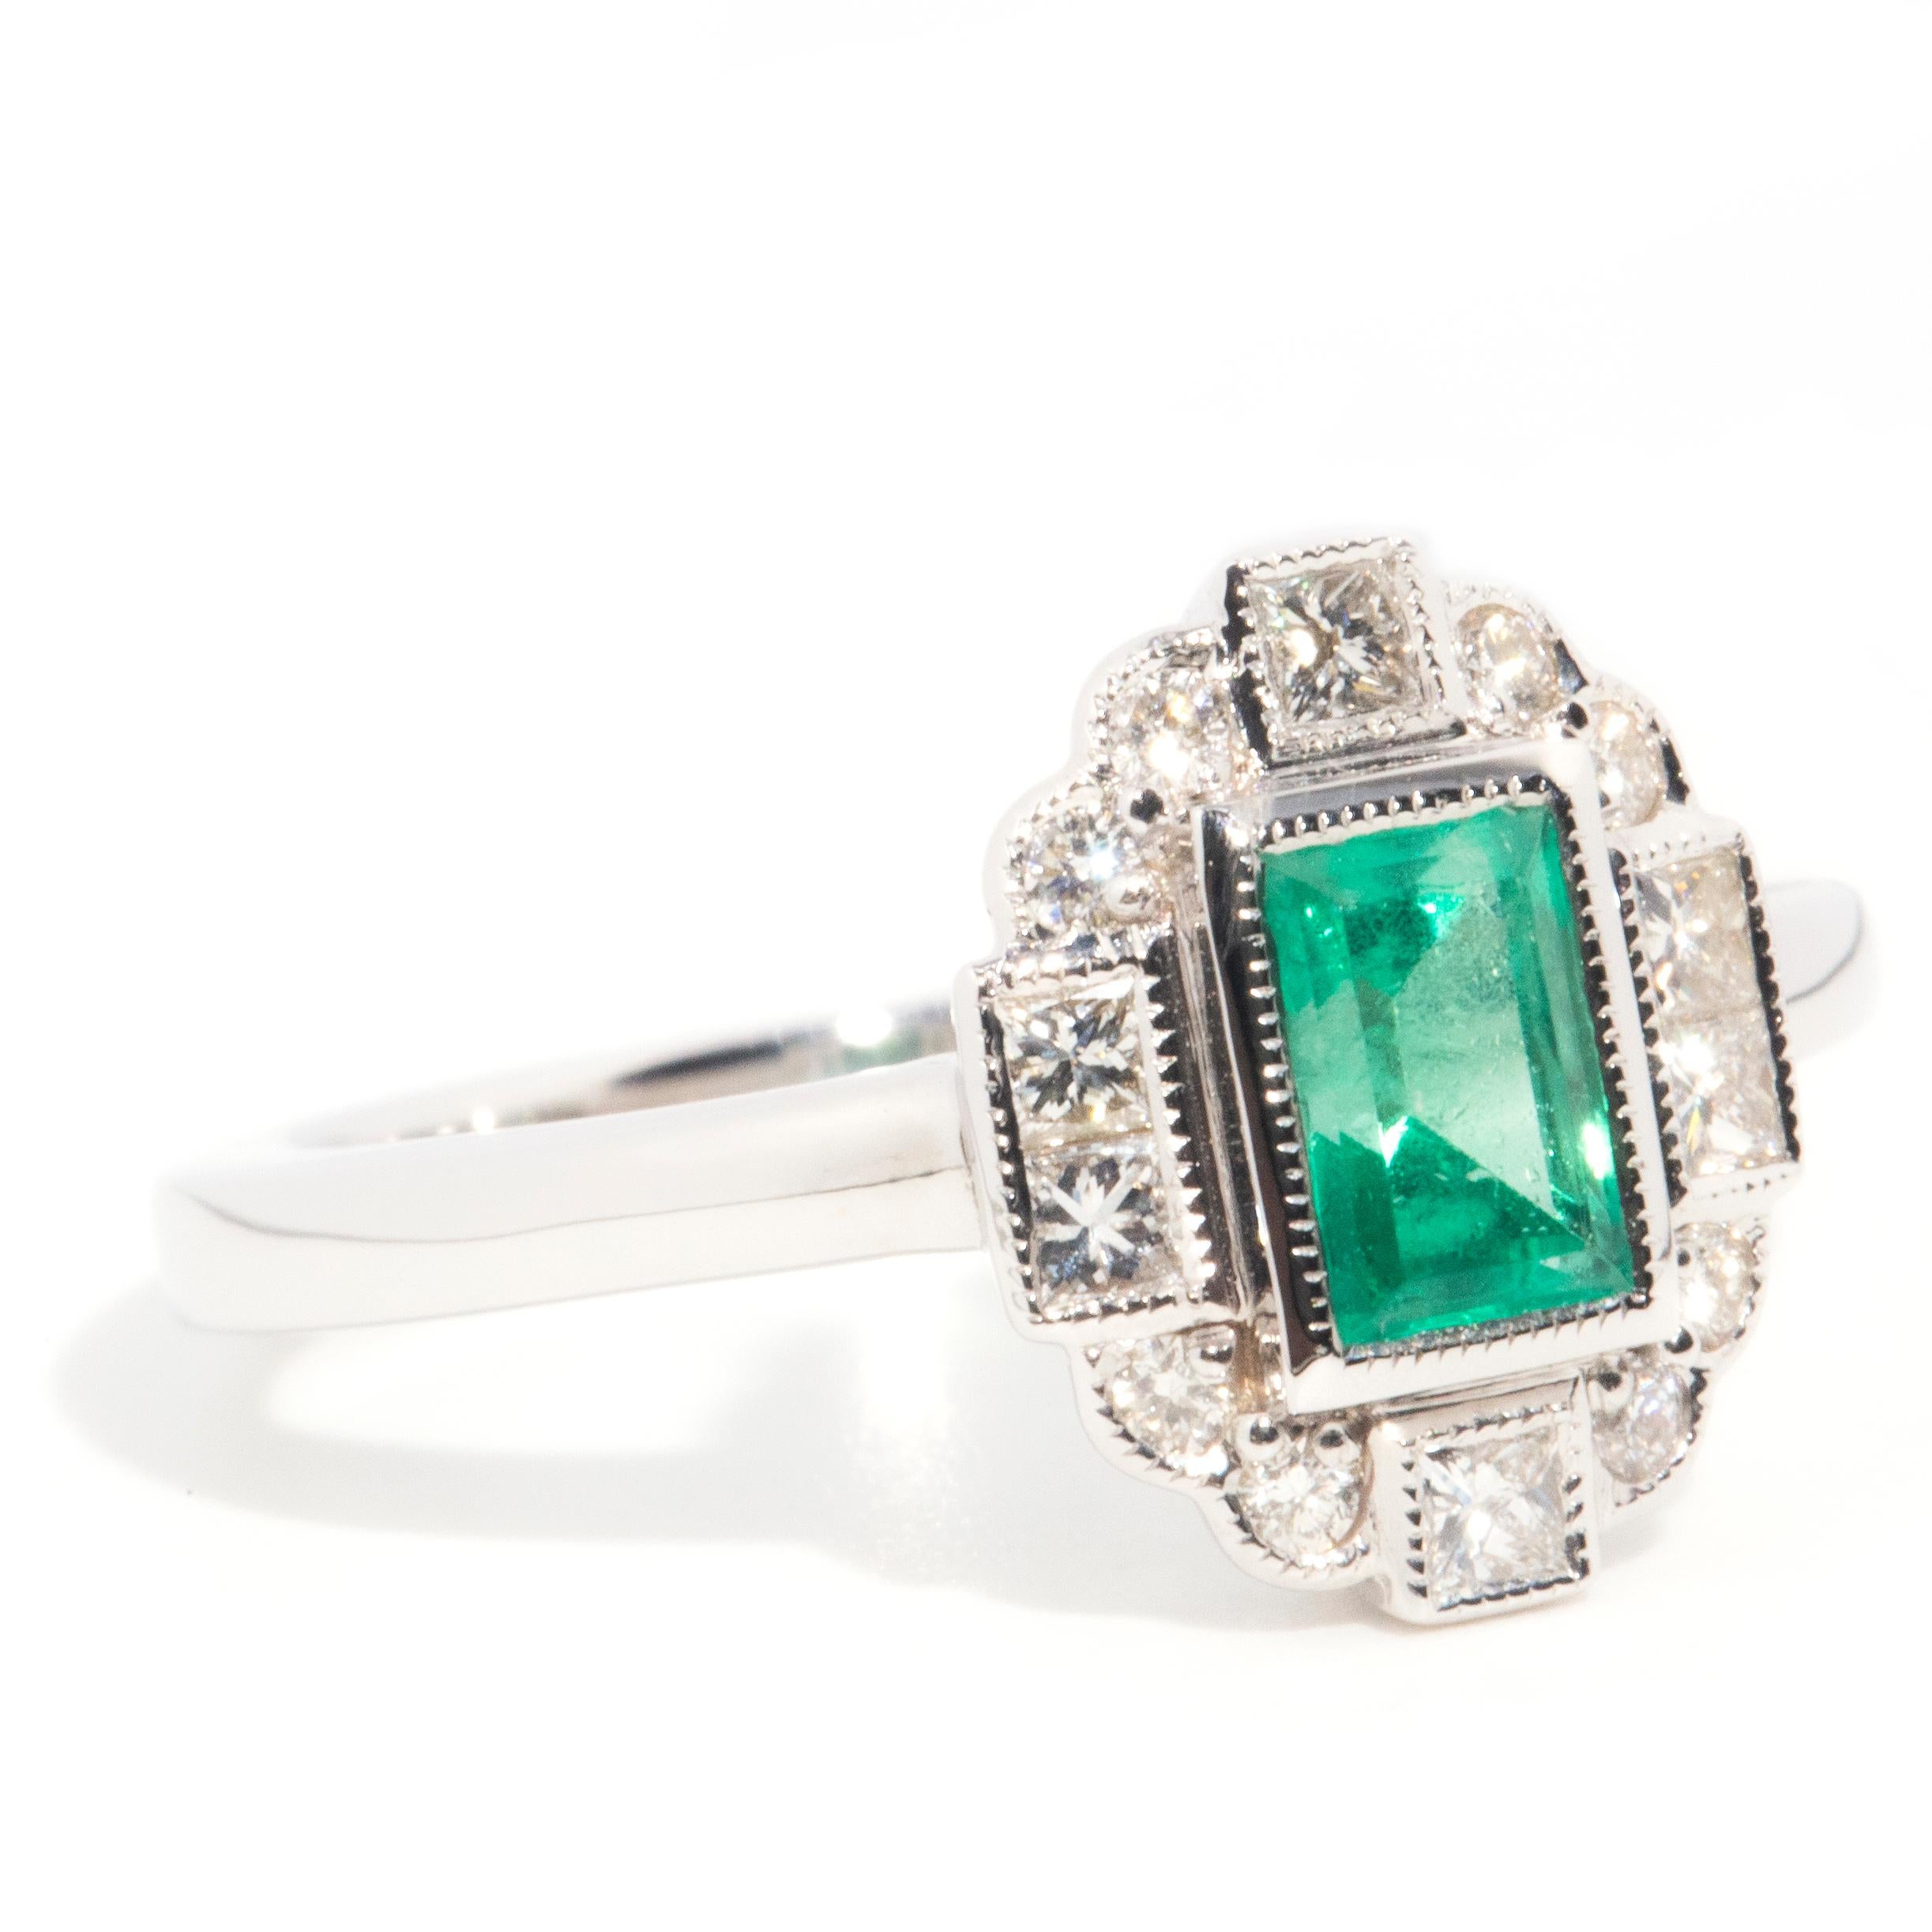 Contemporary Art Deco Inspired 18 Carat Gold Emerald Cut Emerald and Diamond Cluster Ring